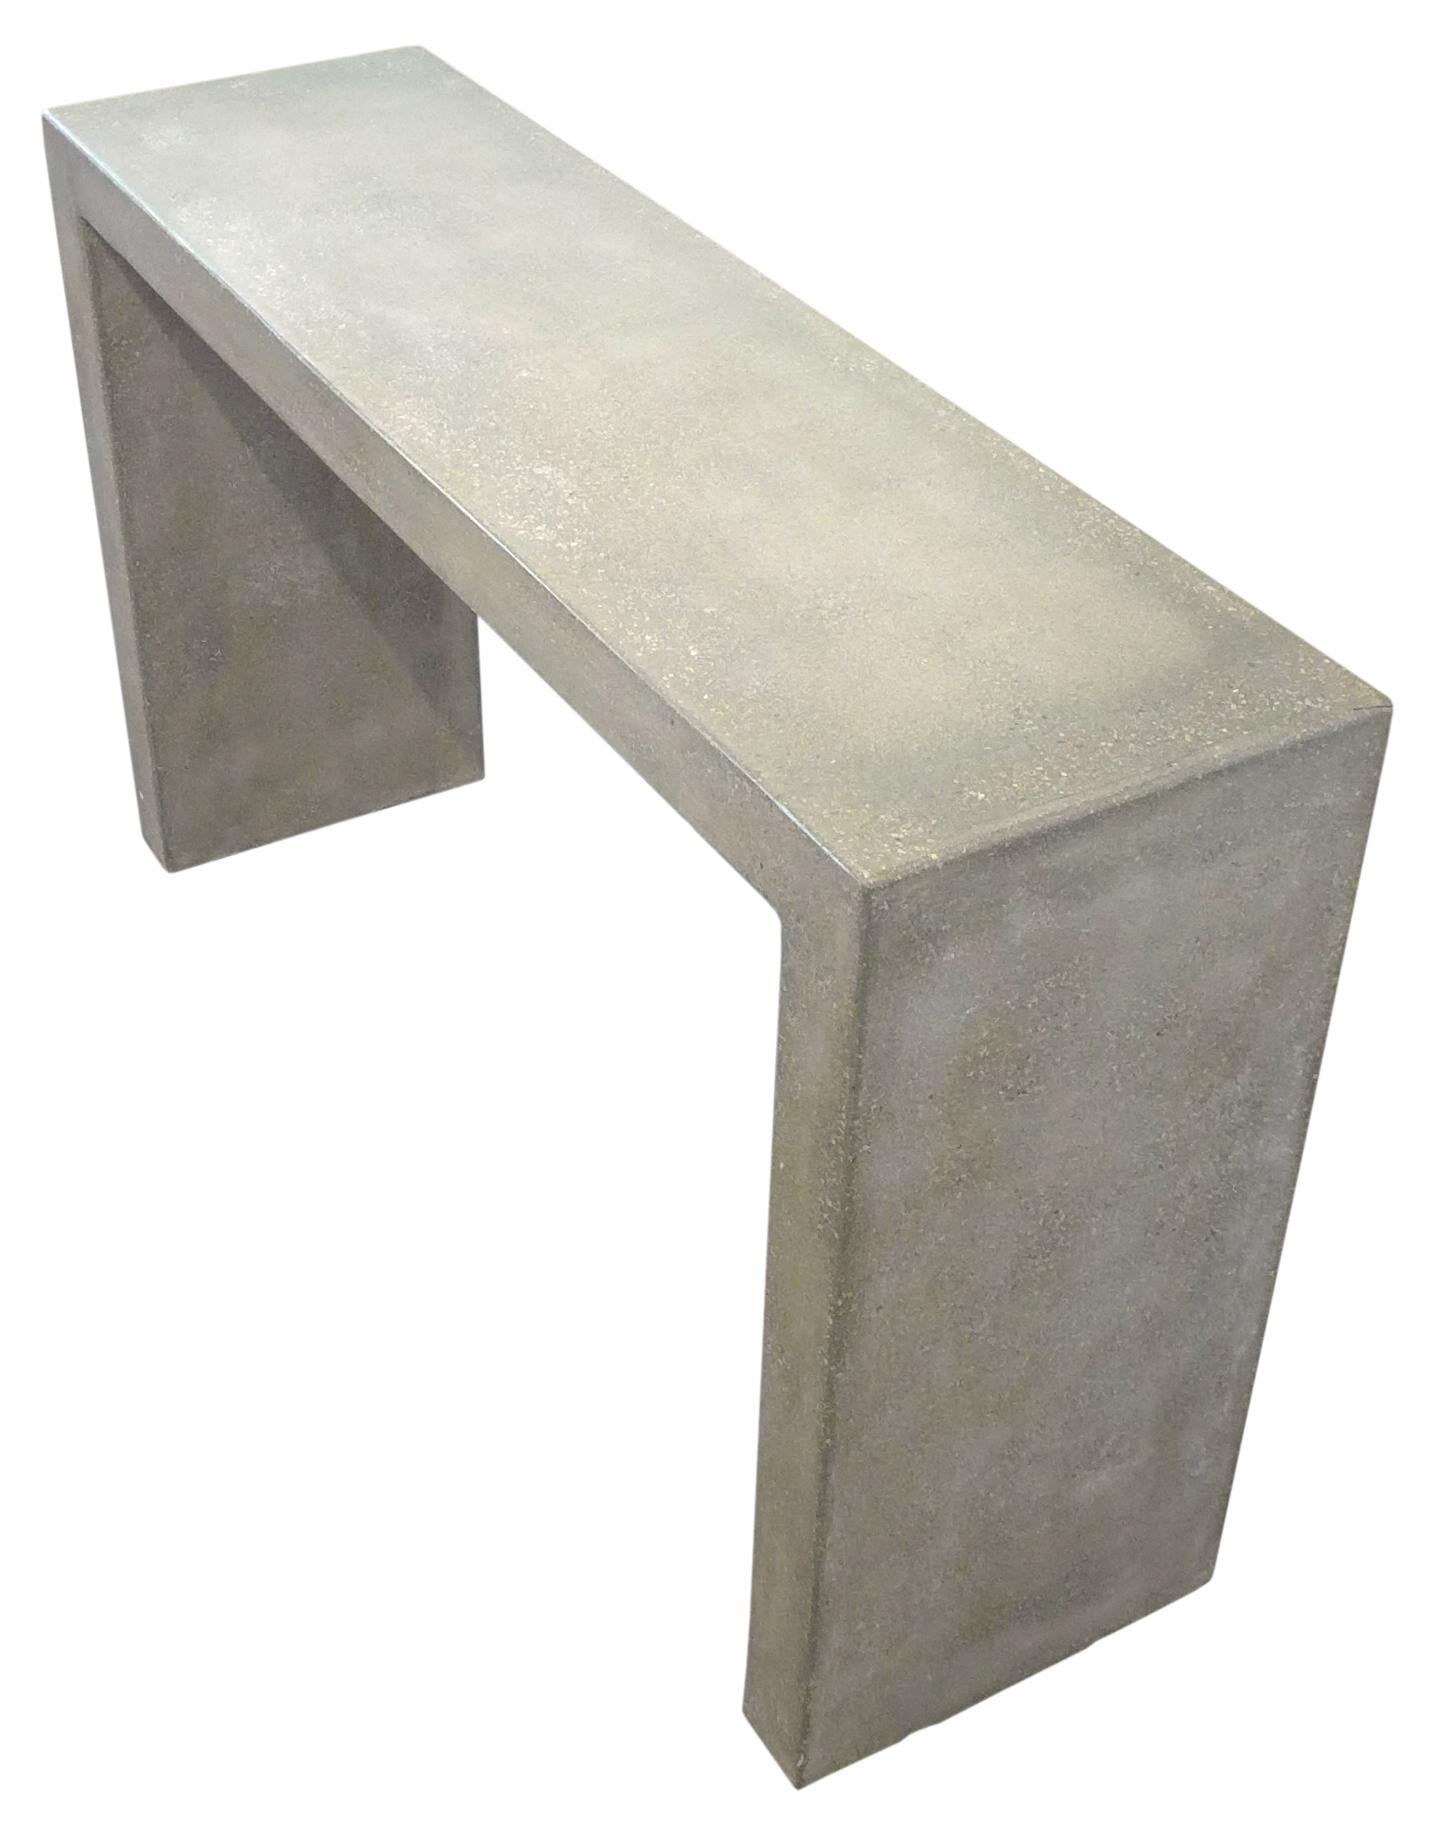 A Minimalist console table of cast concrete. Reduced yet commanding and Judd-like in its simplicity. A very utilitarian form that functions well in a wide range of decorative concepts.